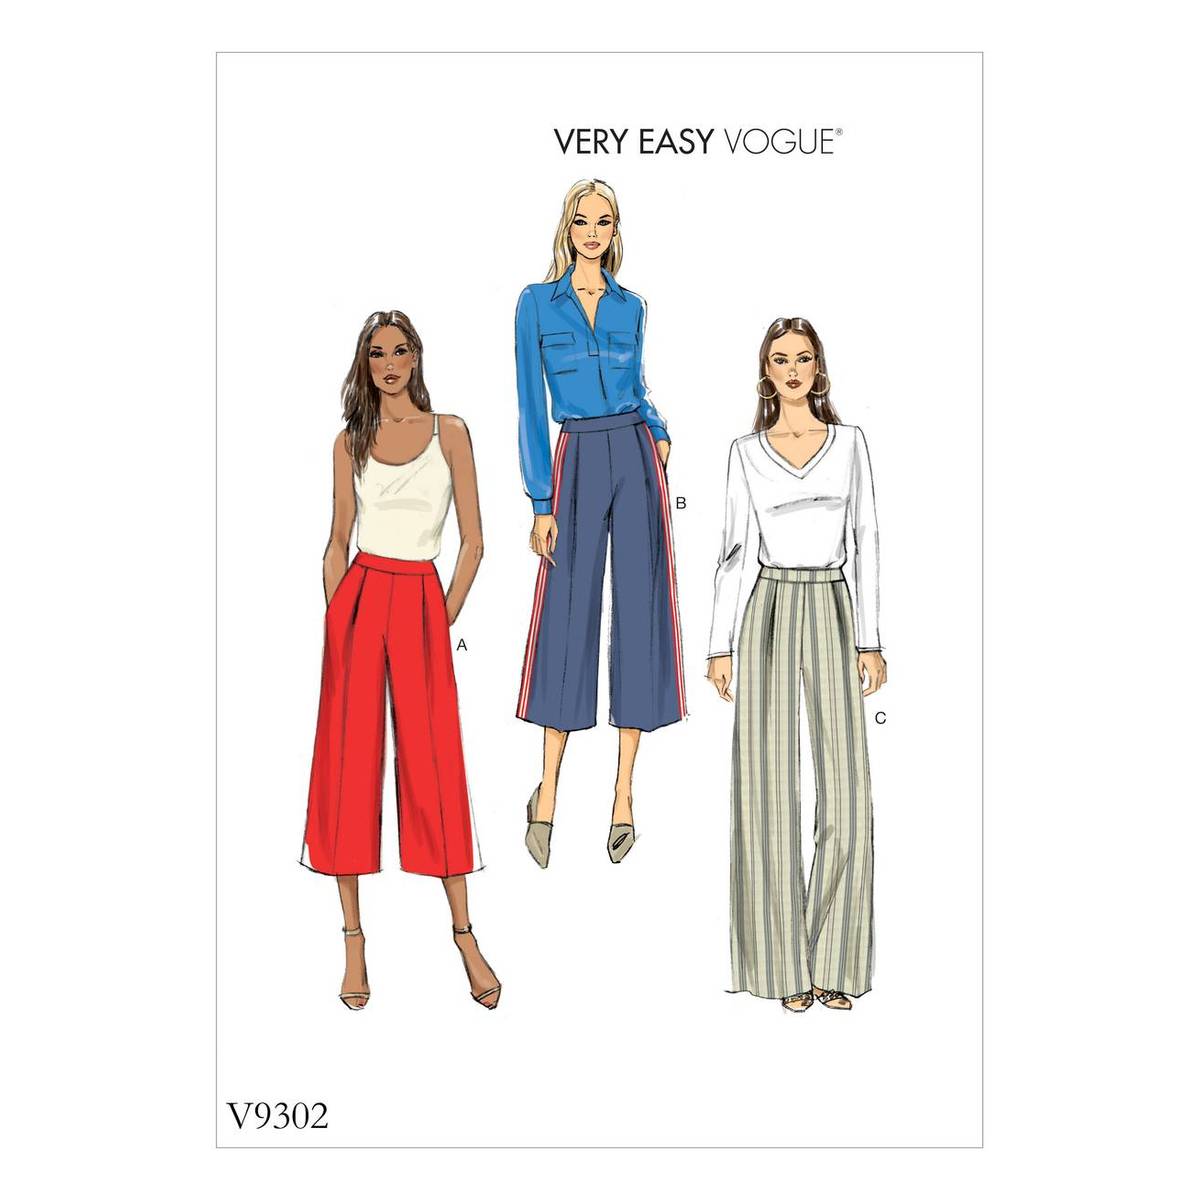 Vogue Women’s Trousers Sewing Pattern V9302 | Hobbycraft